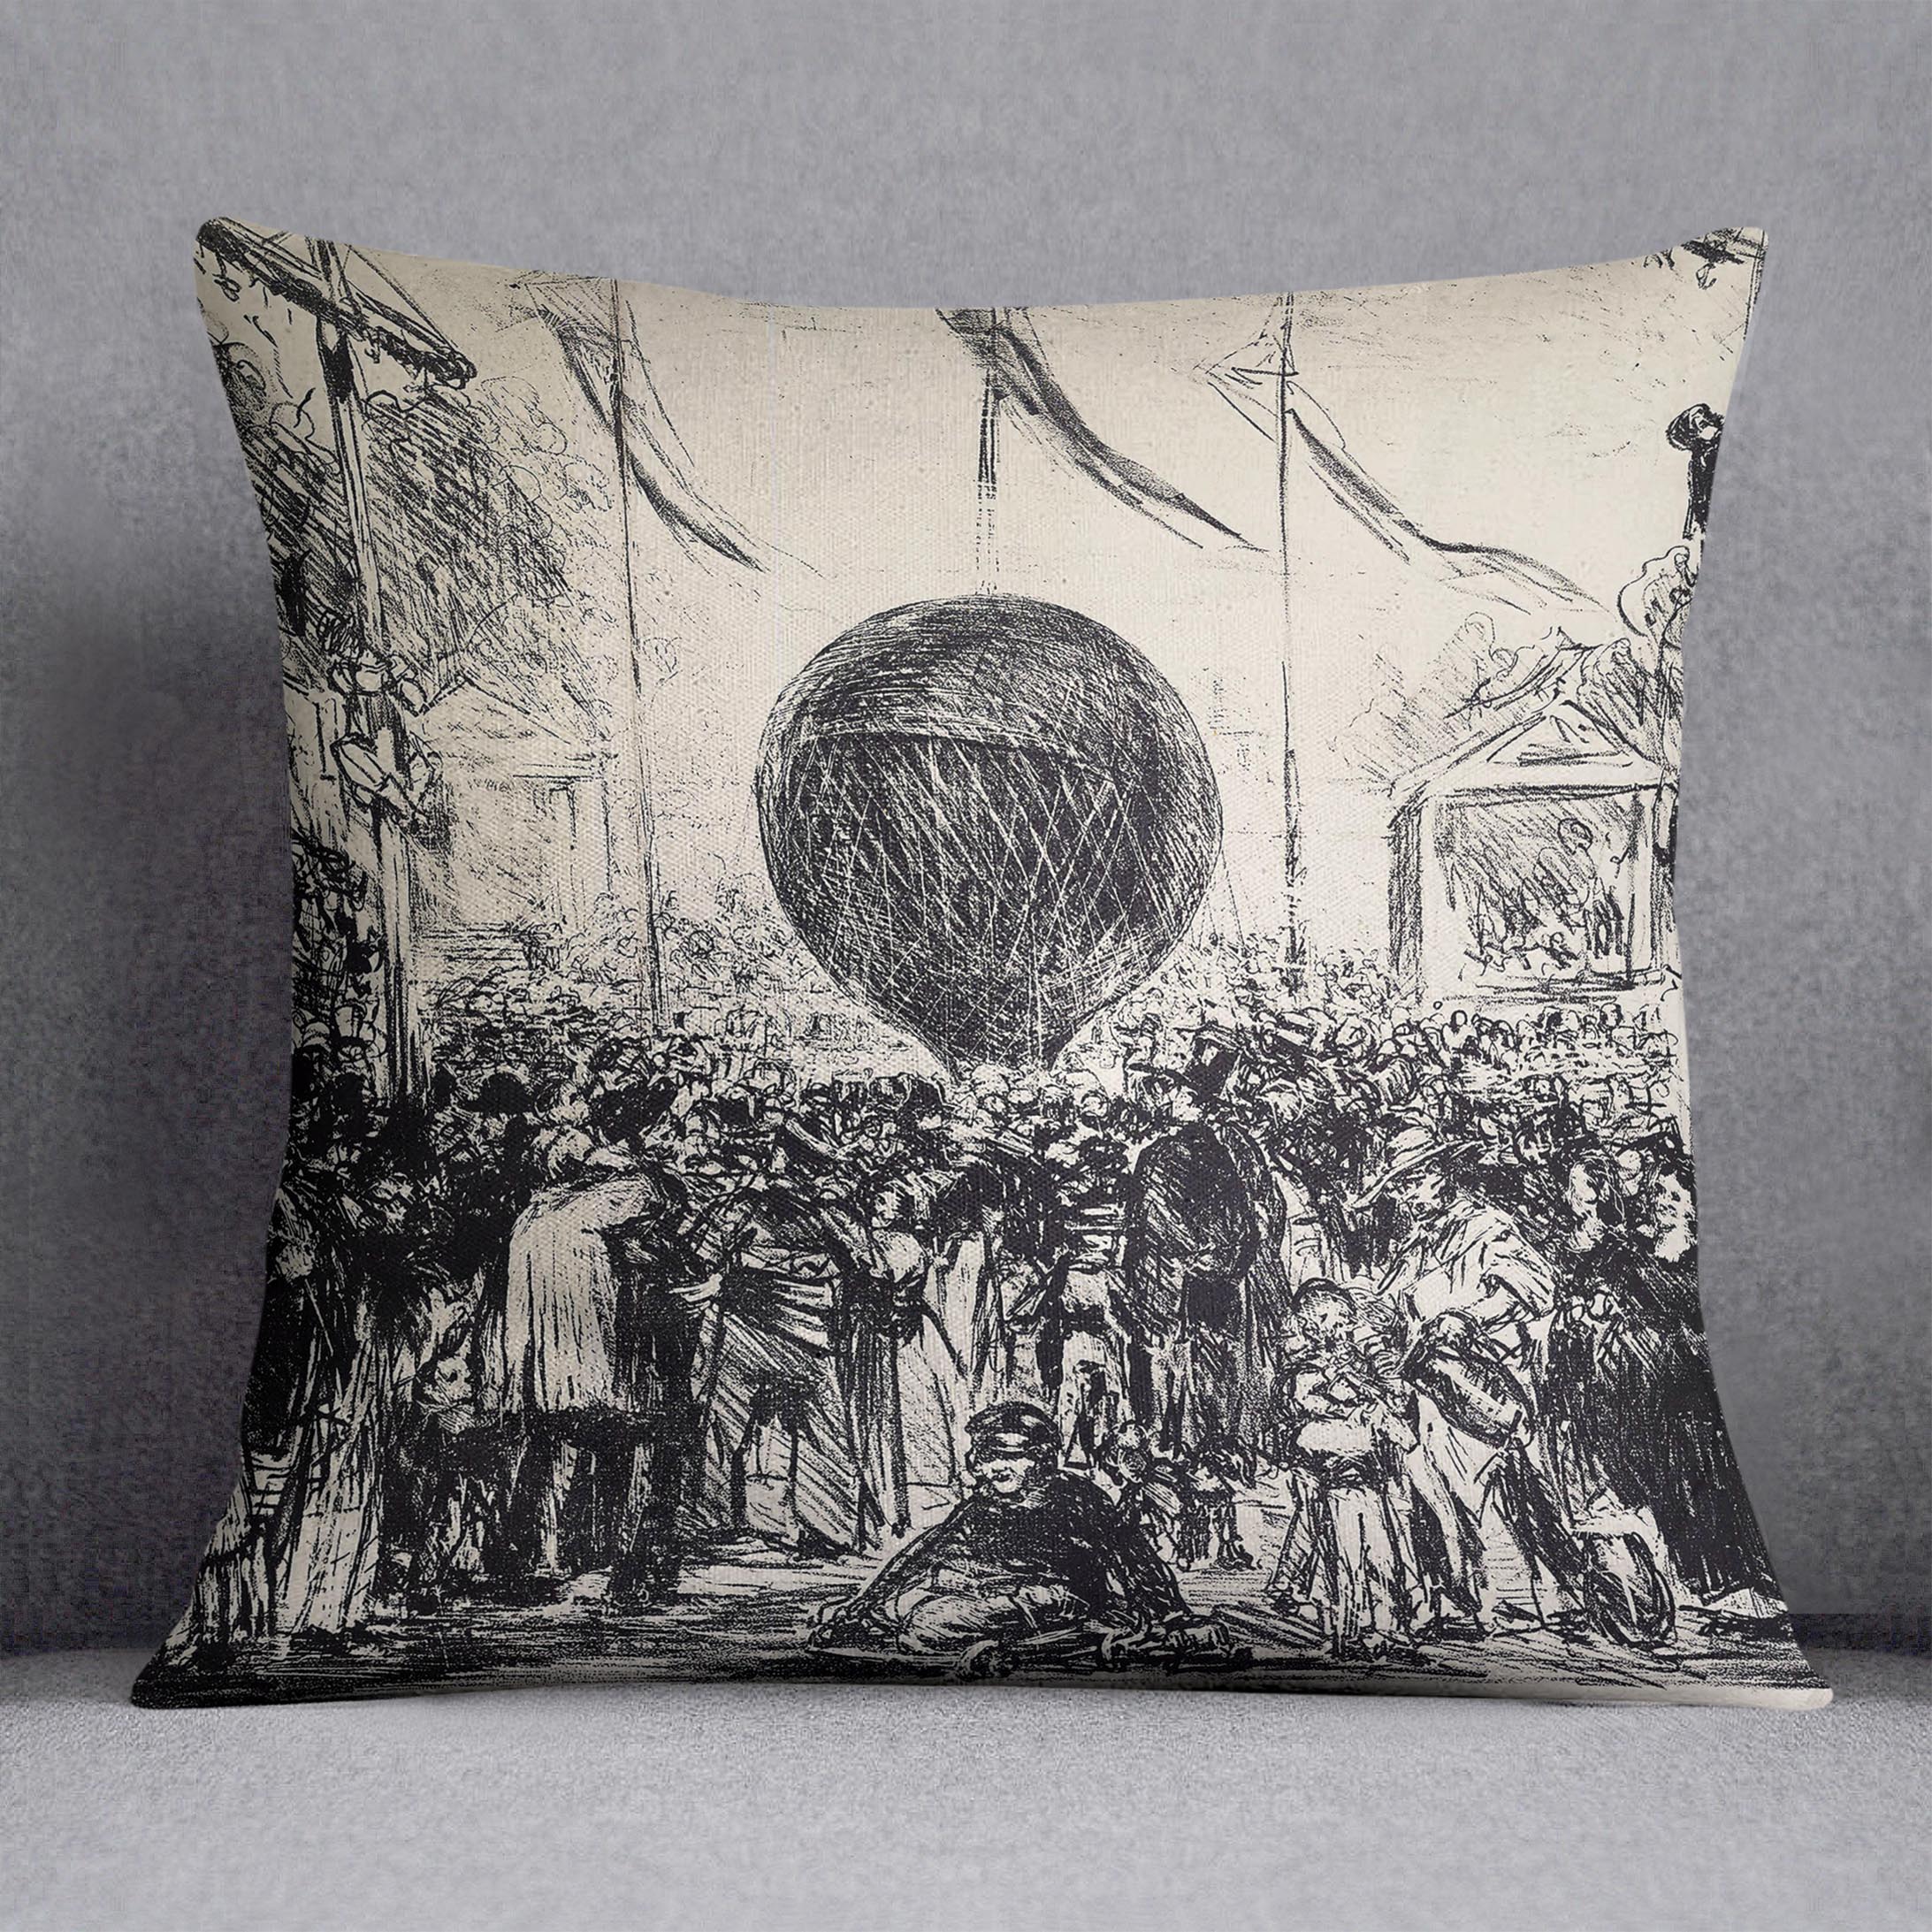 The Balloon by Manet Cushion